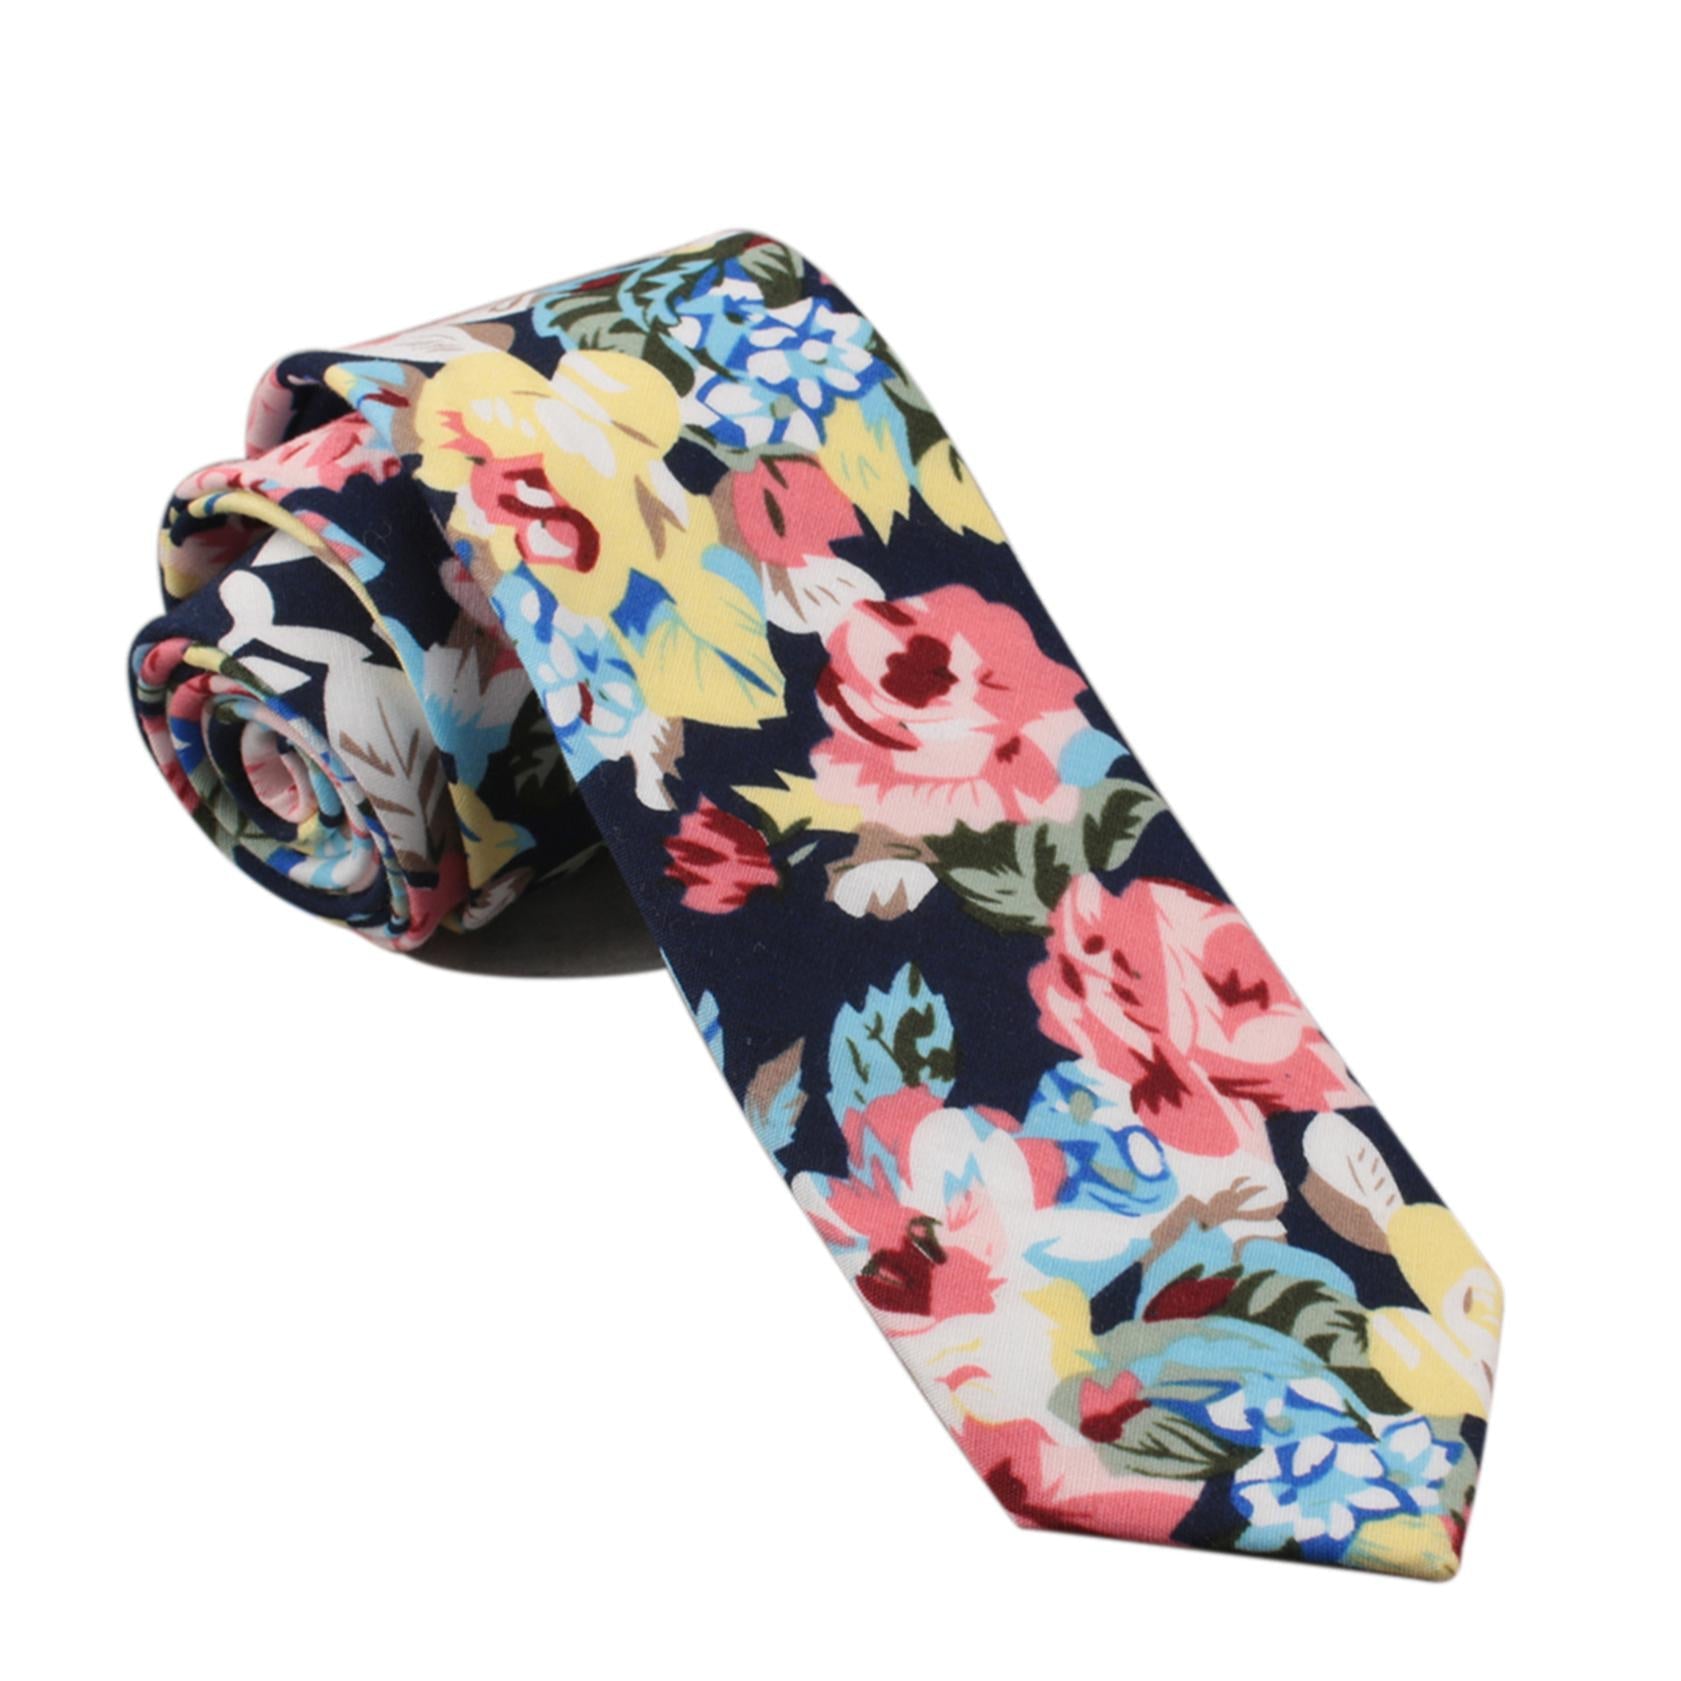 Floral Ties for Men Blue 2.36&quot; STELLA - MYTIESHOP-Neckties-Floral Ties for Men Blue Floral Ties for Men Necktie for weddings and events, great for prom and anniversary gifts. Mens floral ties near me us ties tie-Mytieshop. Skinny ties for weddings anniversaries. Father of bride. Groomsmen. Cool skinny neckties for men. Neckwear for prom, missions and fancy events. Gift ideas for men. Anniversaries ideas. Wedding aesthetics. Flower ties. Dry flower ties.